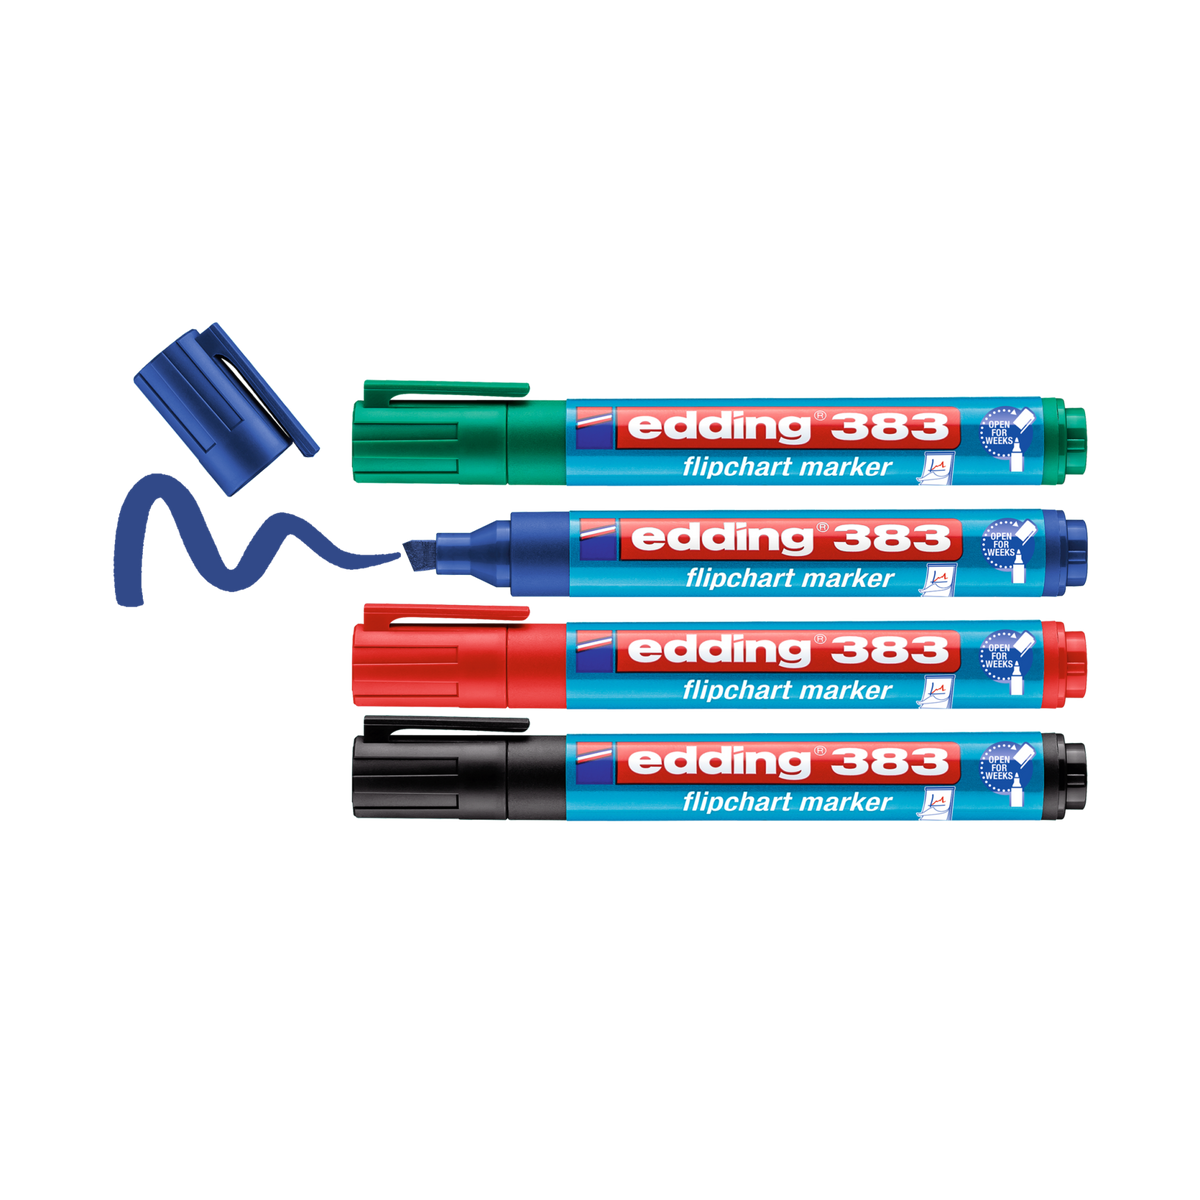 Edding 383 Flipchart Marker Chisel Nib 1-5 mm, Marker for Writing, Drawing  and Marking on Flipchart Paper,Does Not Bleed Through - AliExpress